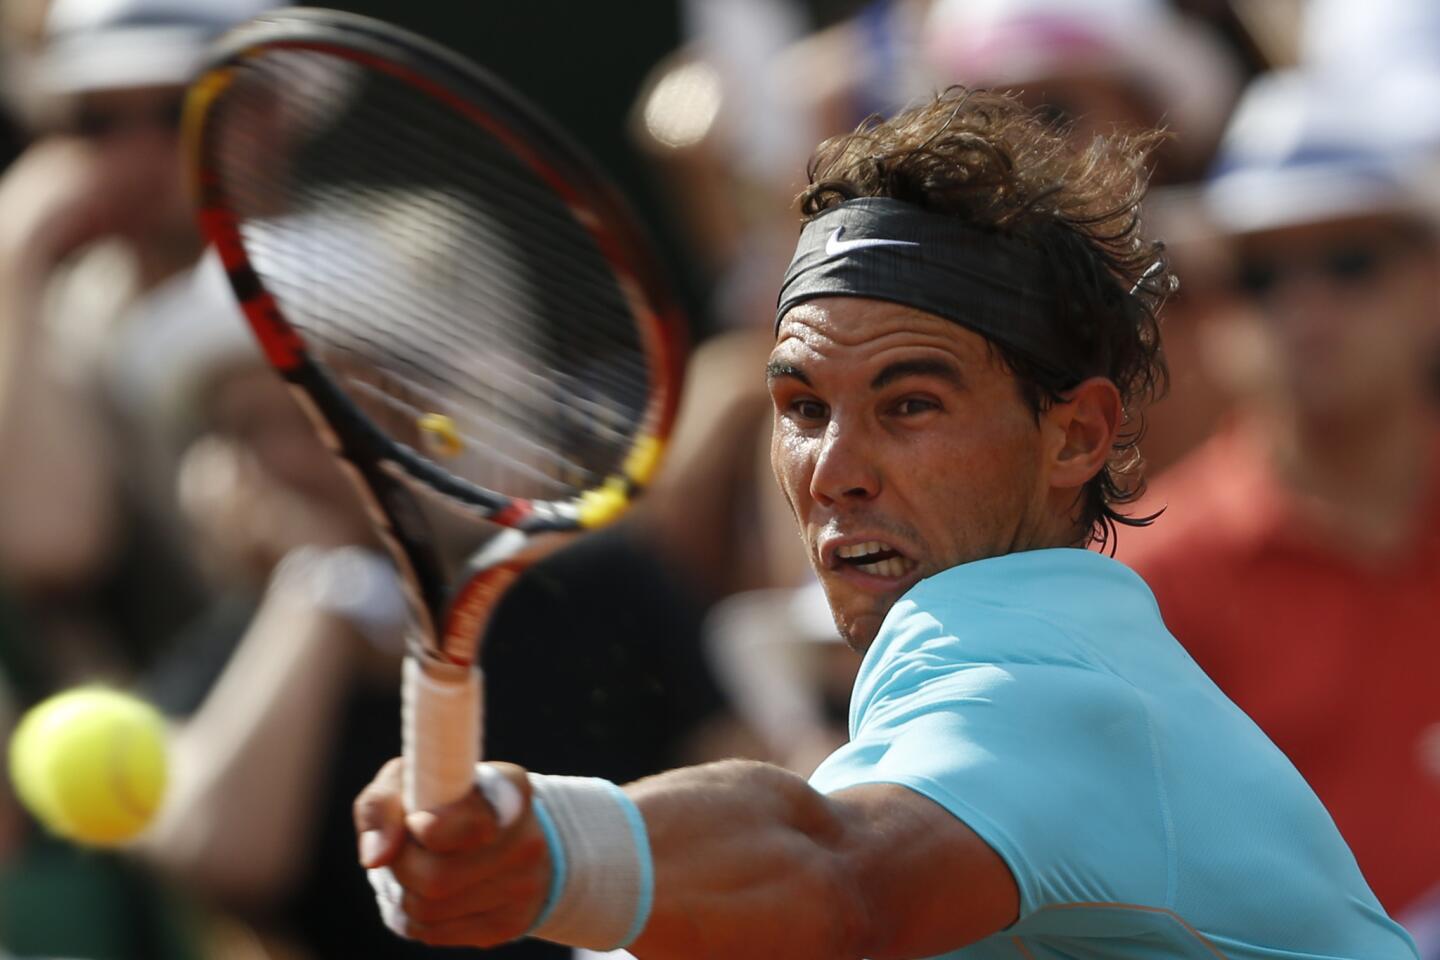 Rafael Nadal, the top-ranked player in the world, hits a patented top-spin forehard return against Novak Djokovic in the championship match of the French Open on Sunday.